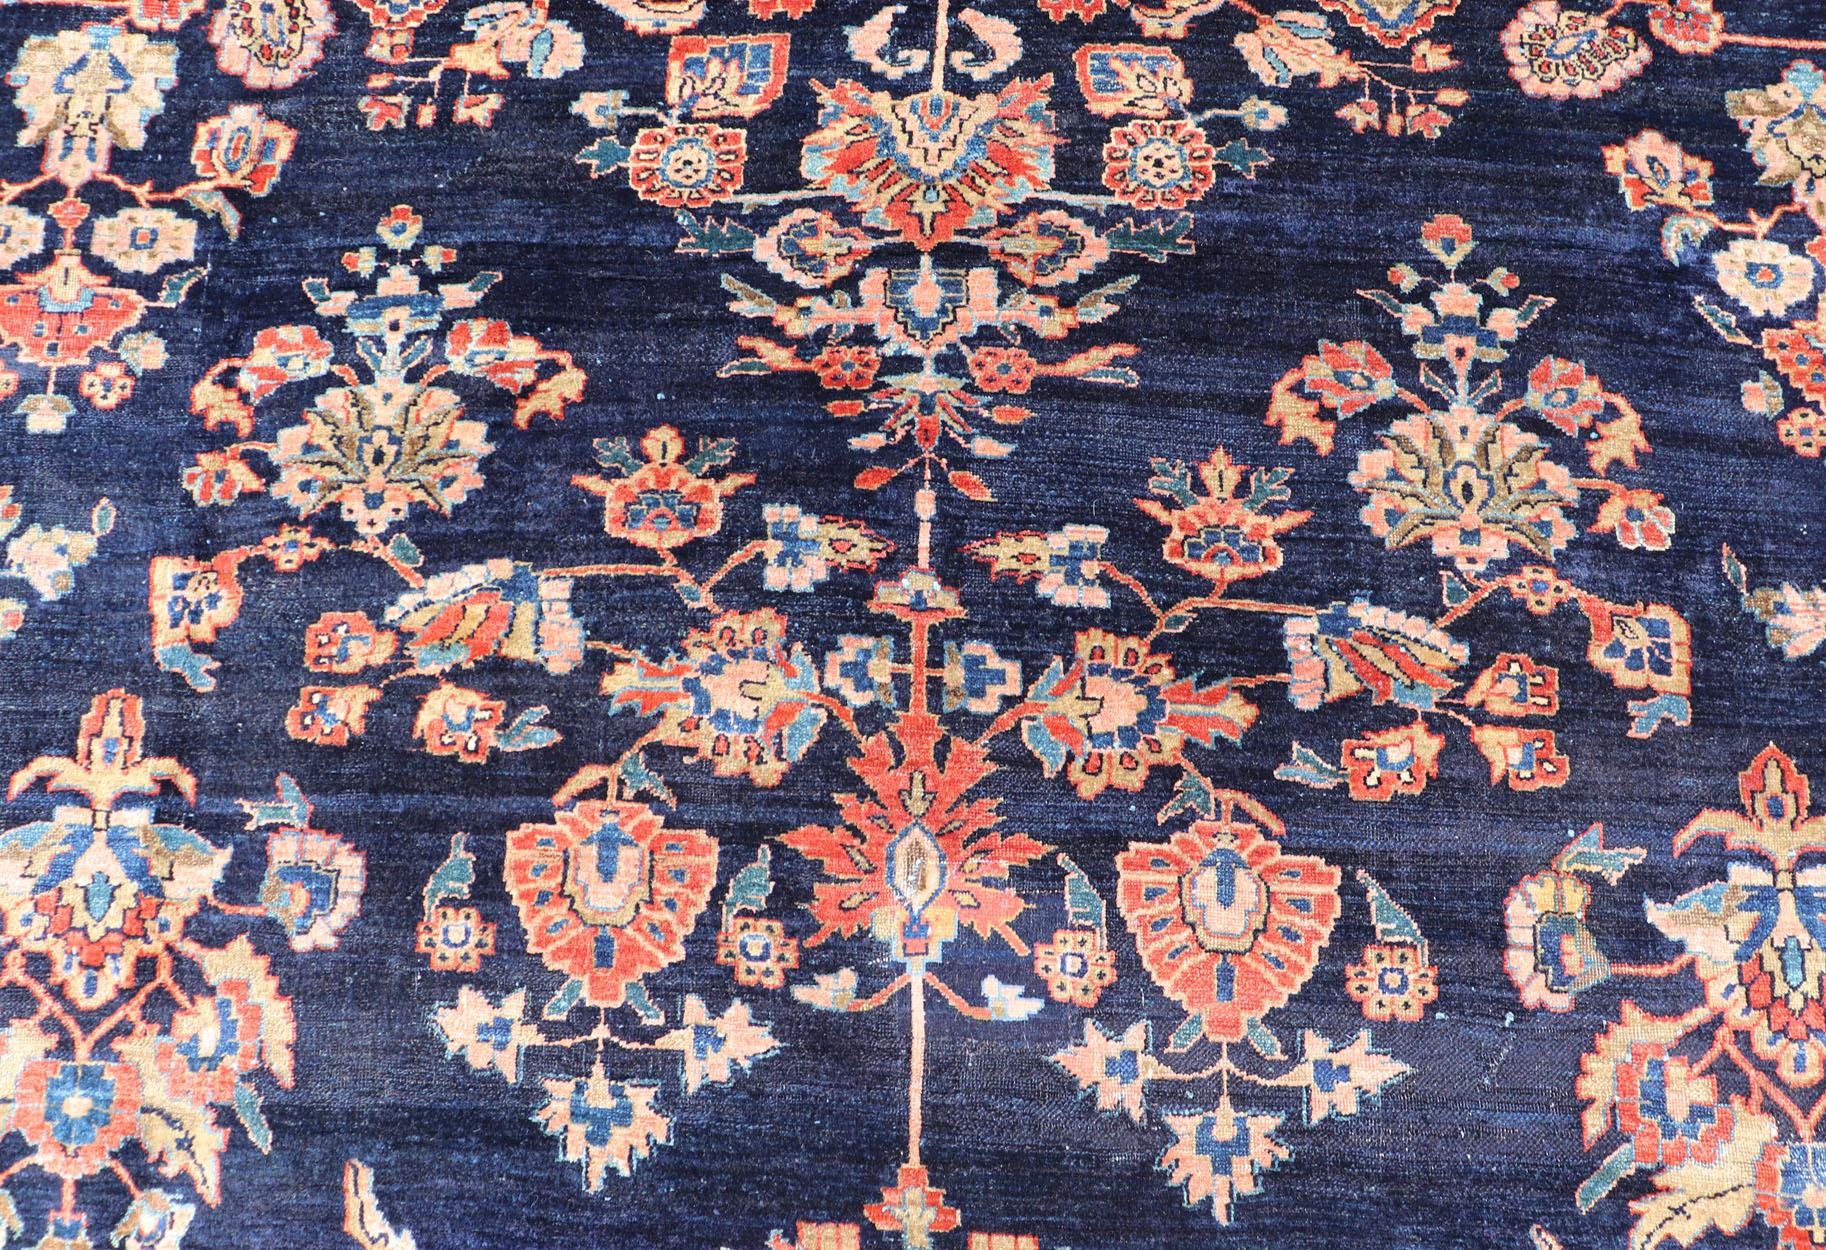 Antique Large Sarouk Faraghan Rug with Floral Pattern in Navy and Orange-Red For Sale 5